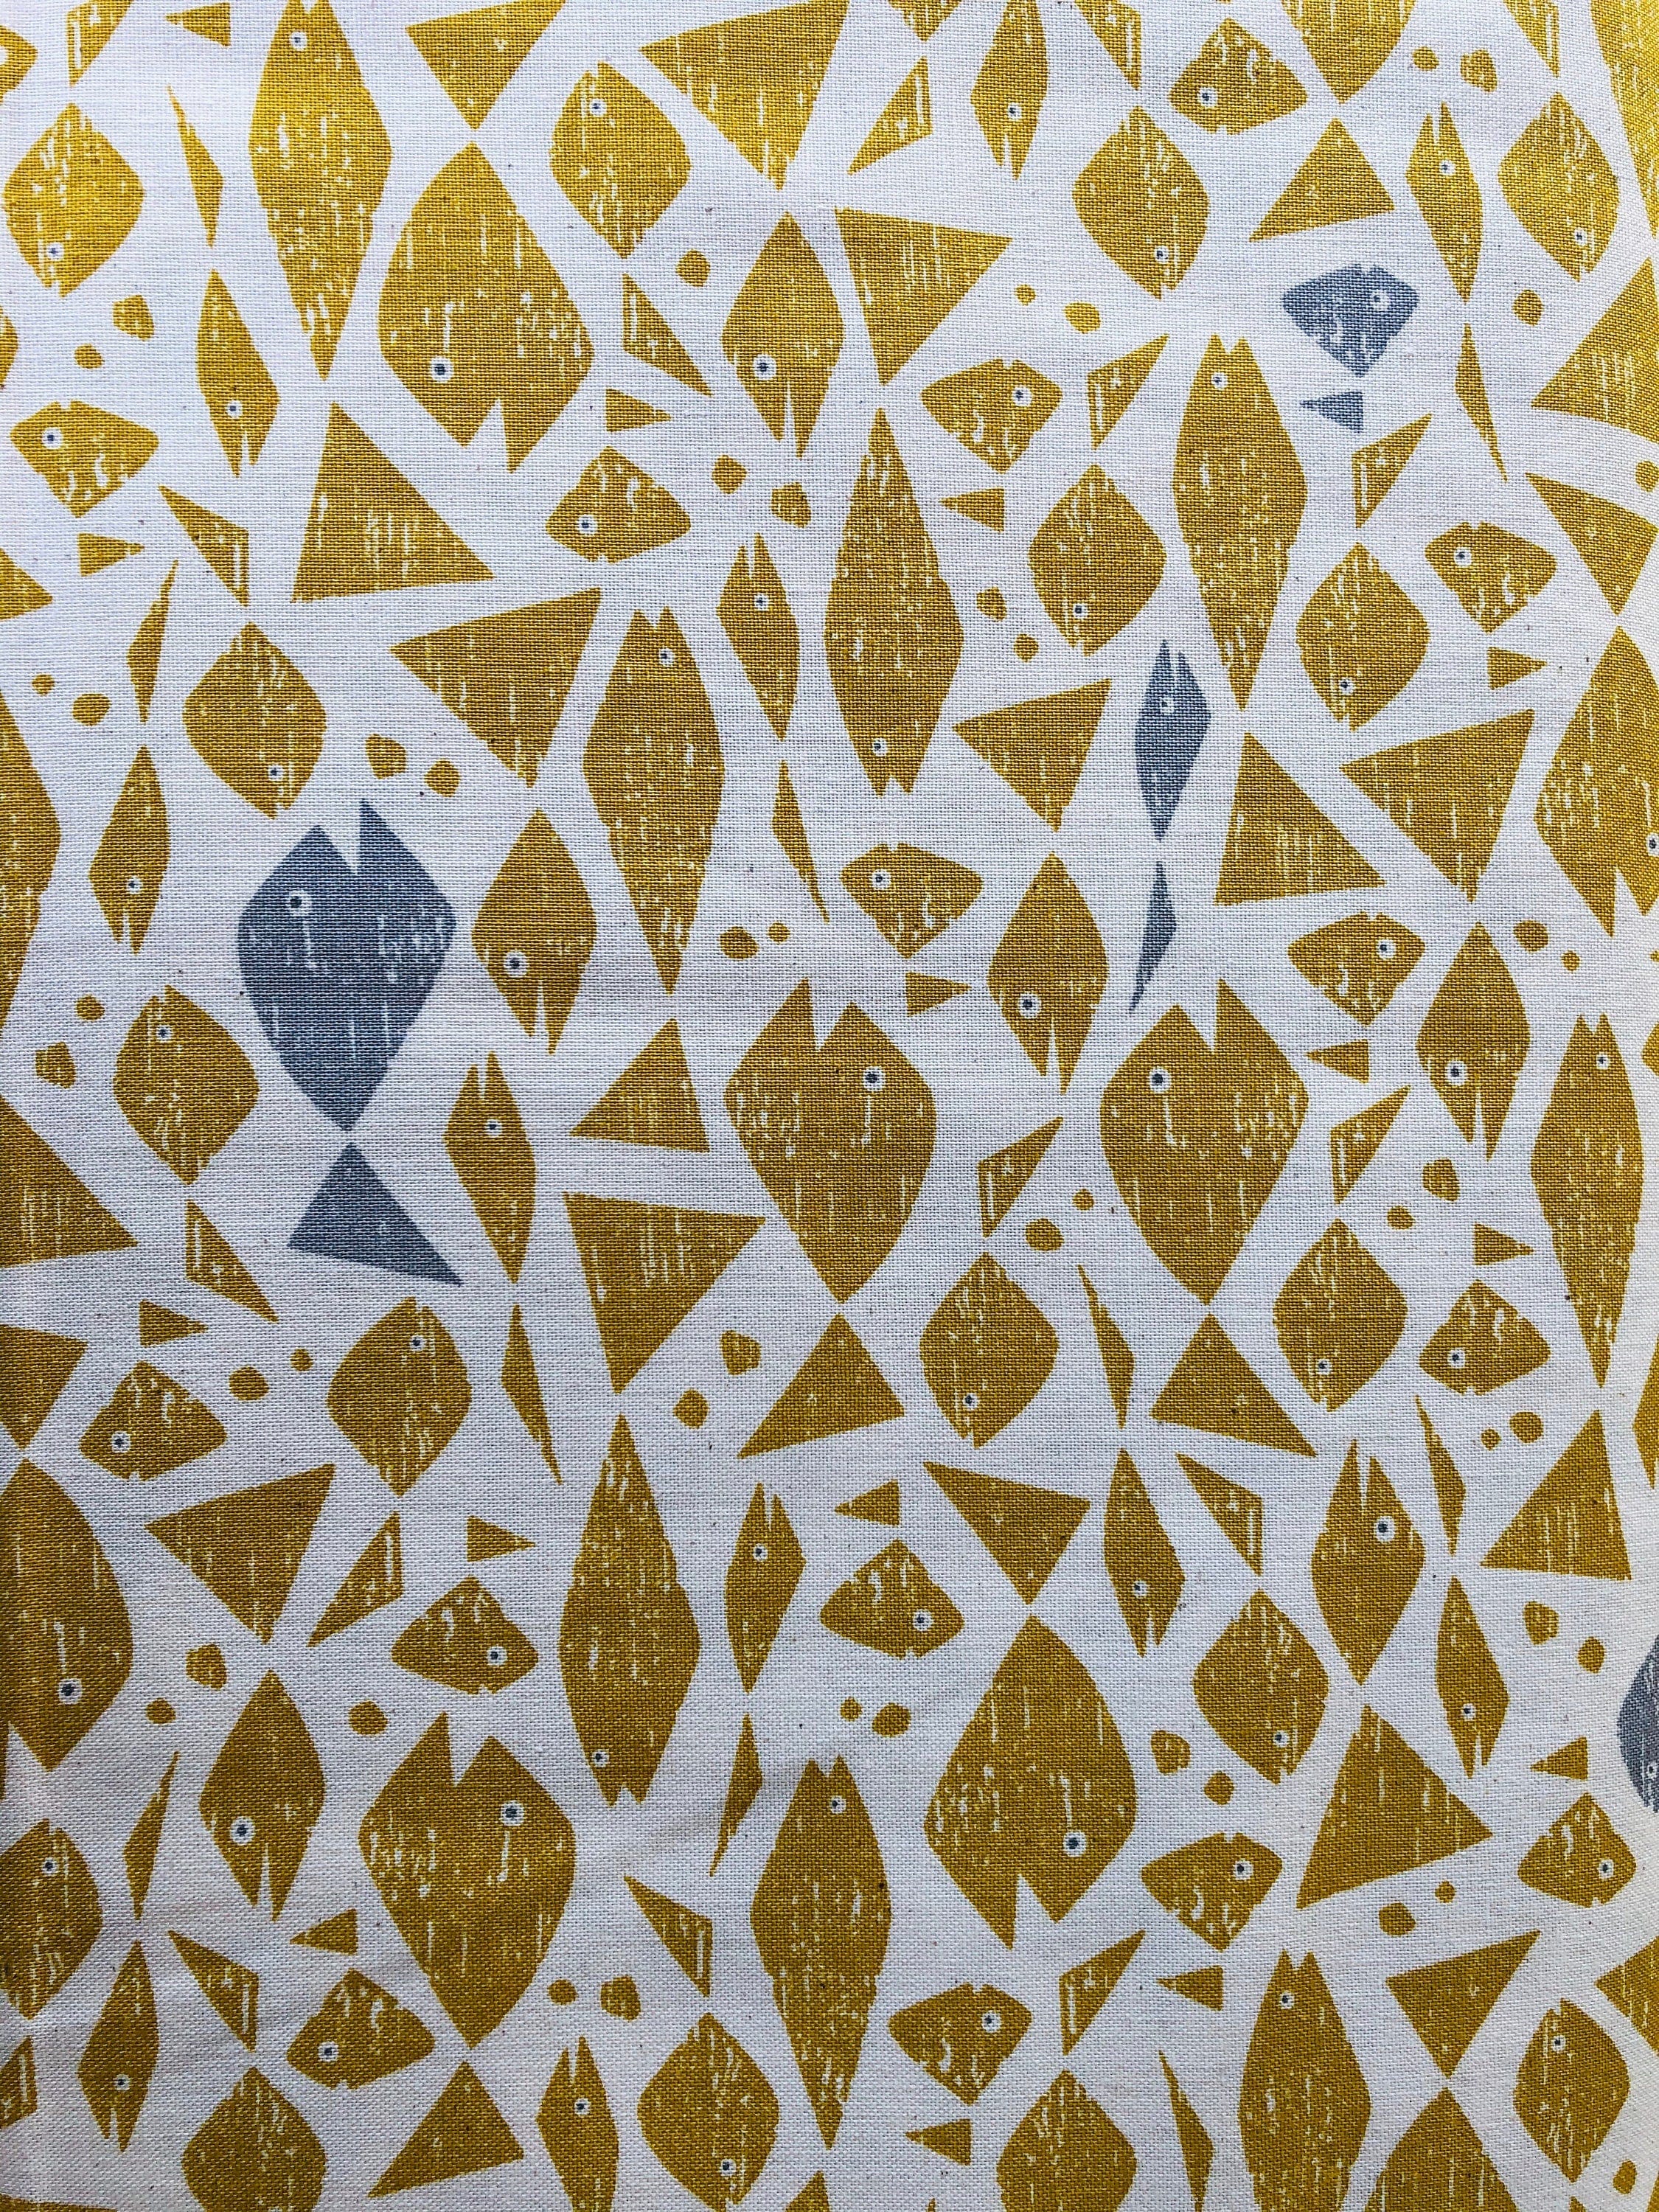 By The Seaside - Happy Fish - Yellow Unbleached Fabric - Loes Van Oosten - Cotton + Steel - Quilting Cotton Fabric - LV102-YE2U